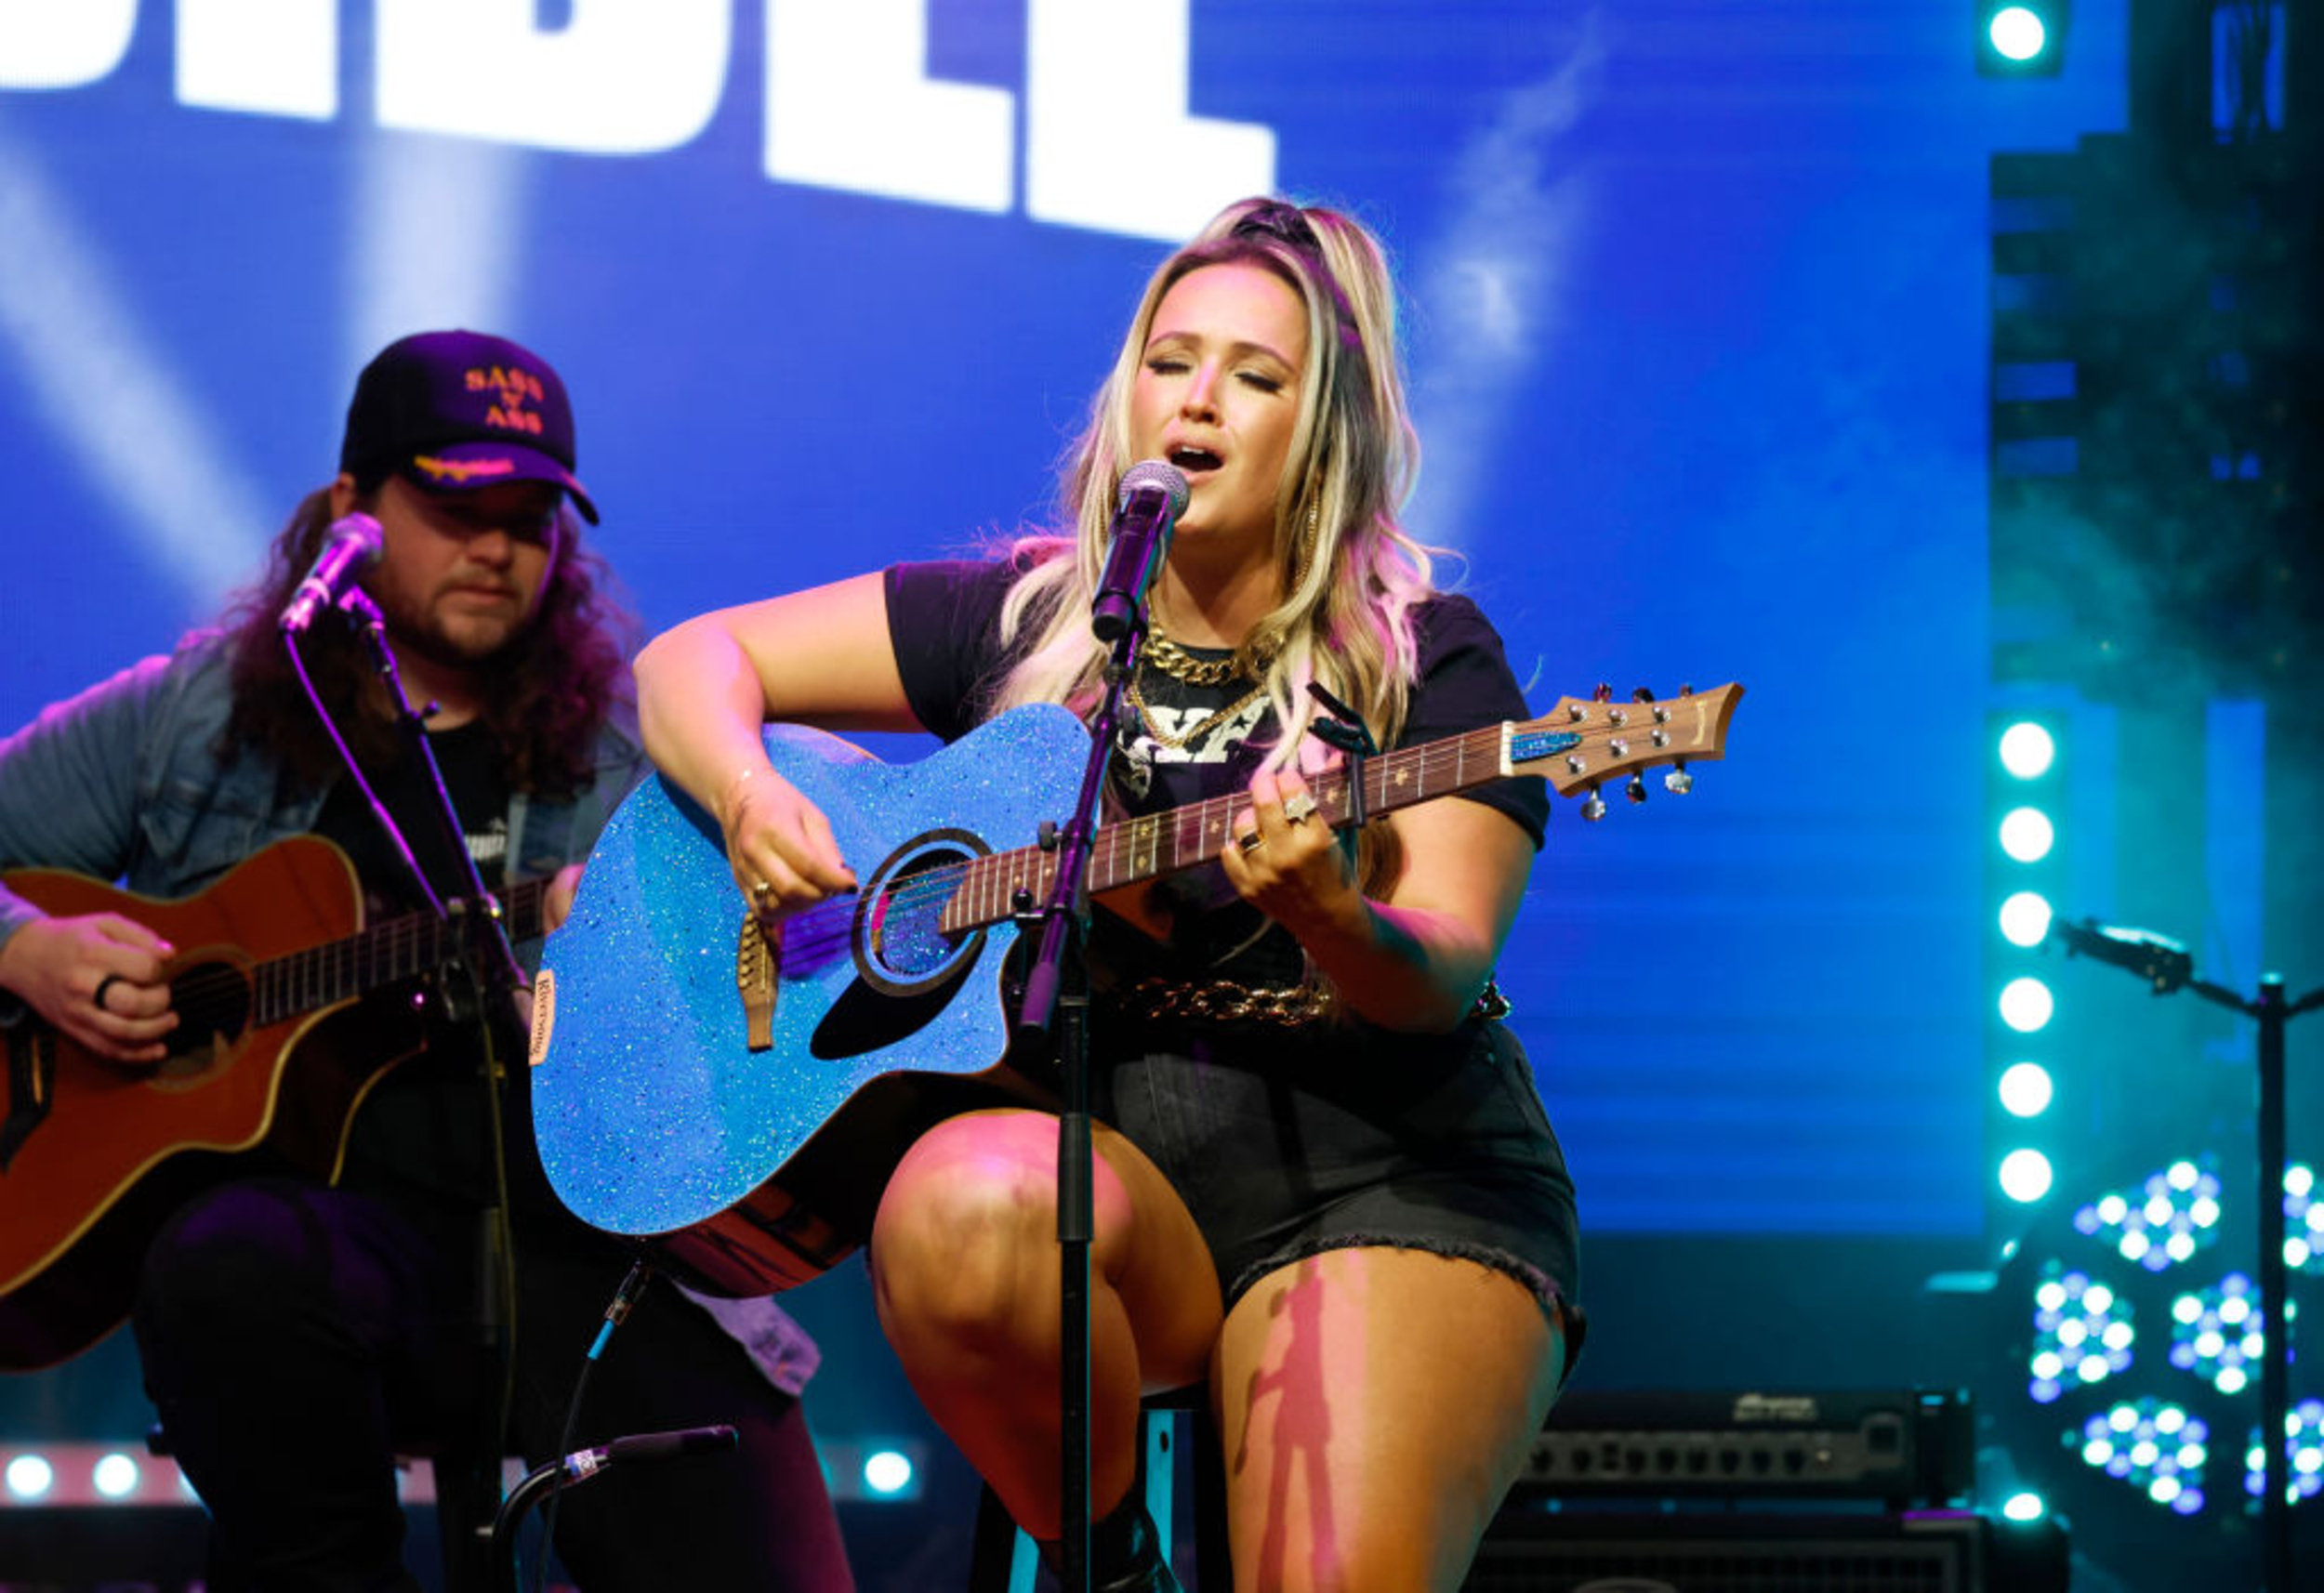 <p>She's already gone viral on TikTok and sold a ton of records, but for whatever reason, Priscilla Block isn't a household name just yet. That could all change in 2024, as she gears up for a really big year. She's headed out on a major North American tour in support of her song "Hey Jack," and fans are definitely going to fall in love with her hard-partying live show. </p><p>You may also like: <a href='https://www.yardbarker.com/entertainment/articles/20_movie_remakes_that_are_better_than_the_original_031924/s1__39563151'>20 movie remakes that are better than the original</a></p>